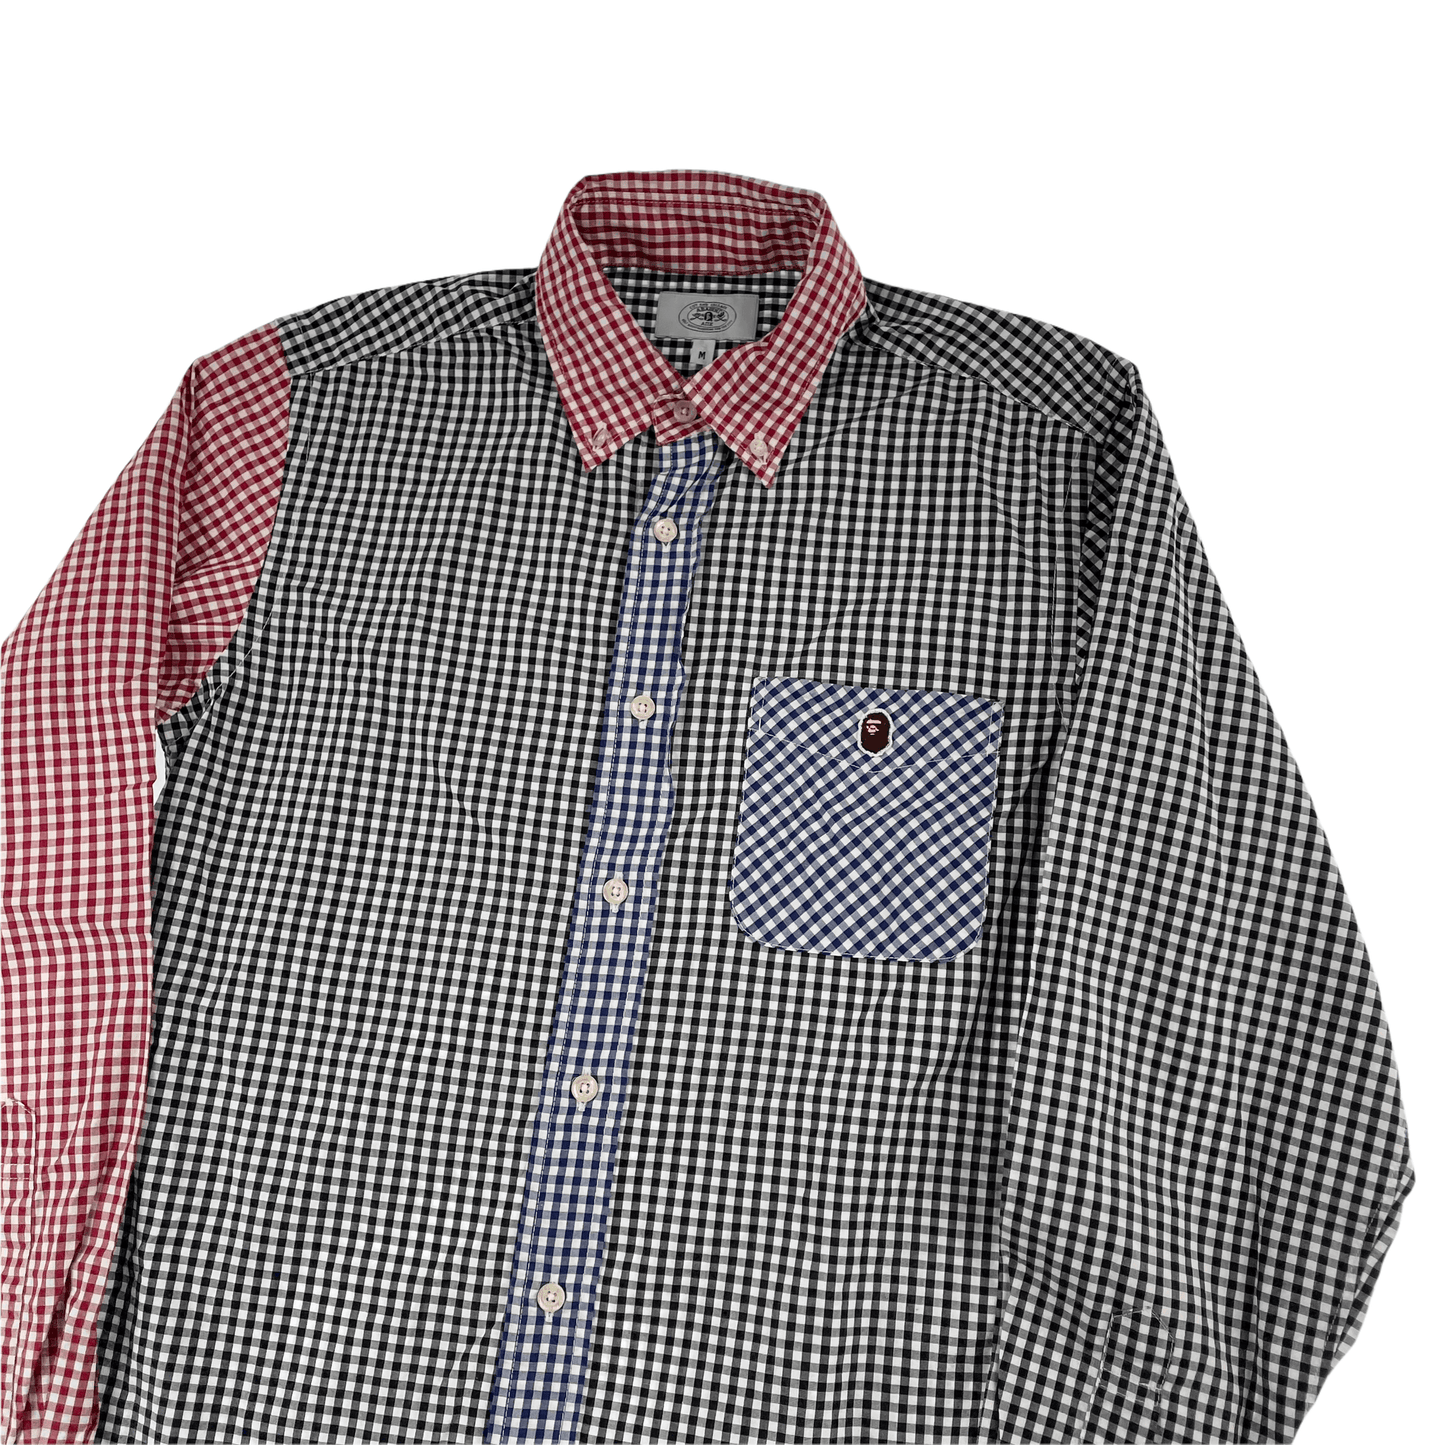 Bape checked shirt size M - Known Source